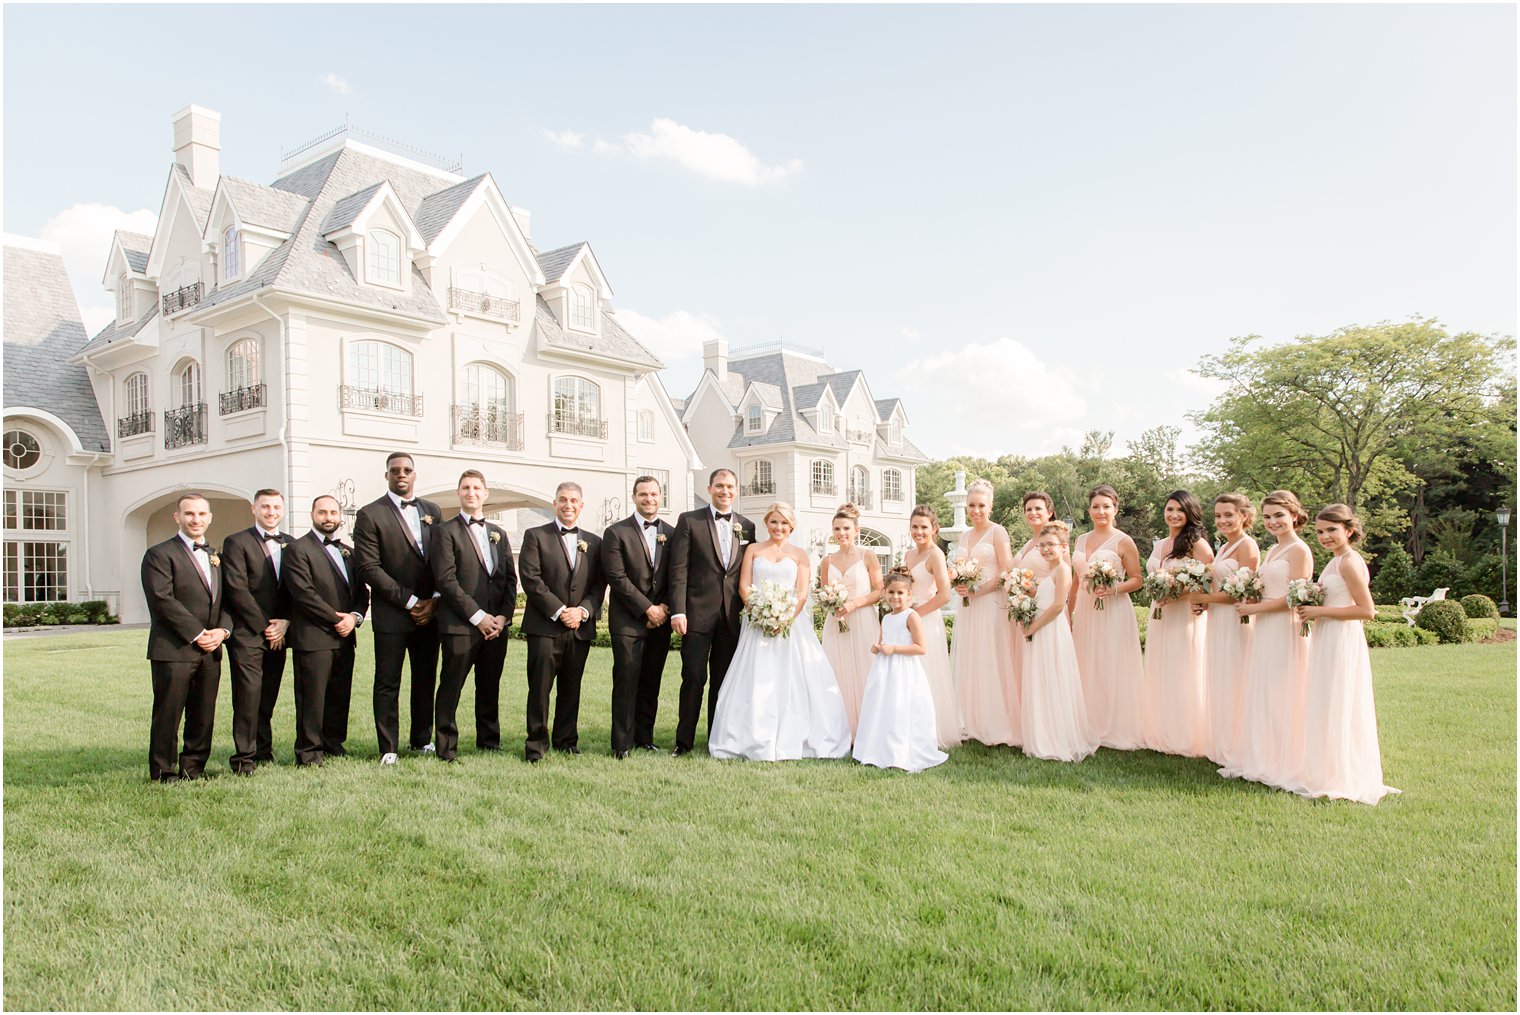 Bridal Party wearing peach and black color palette